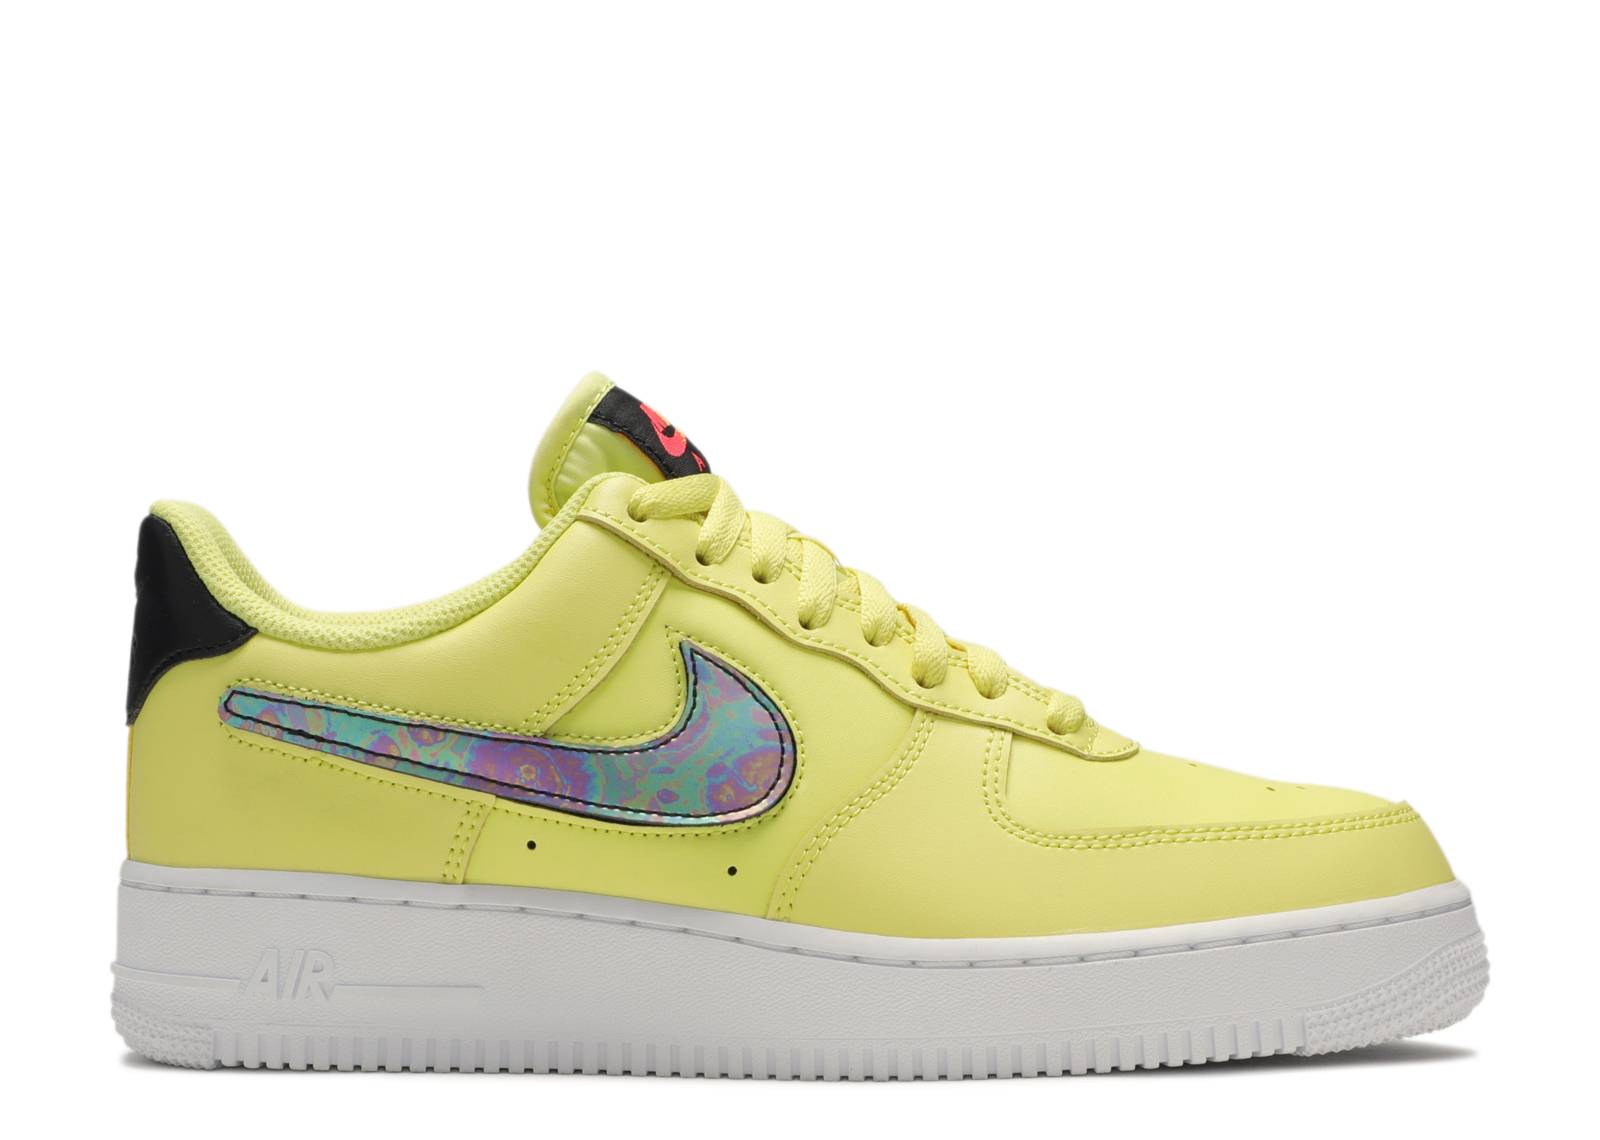 Air Force 1 Low 07 LV8 Yellow Pulse